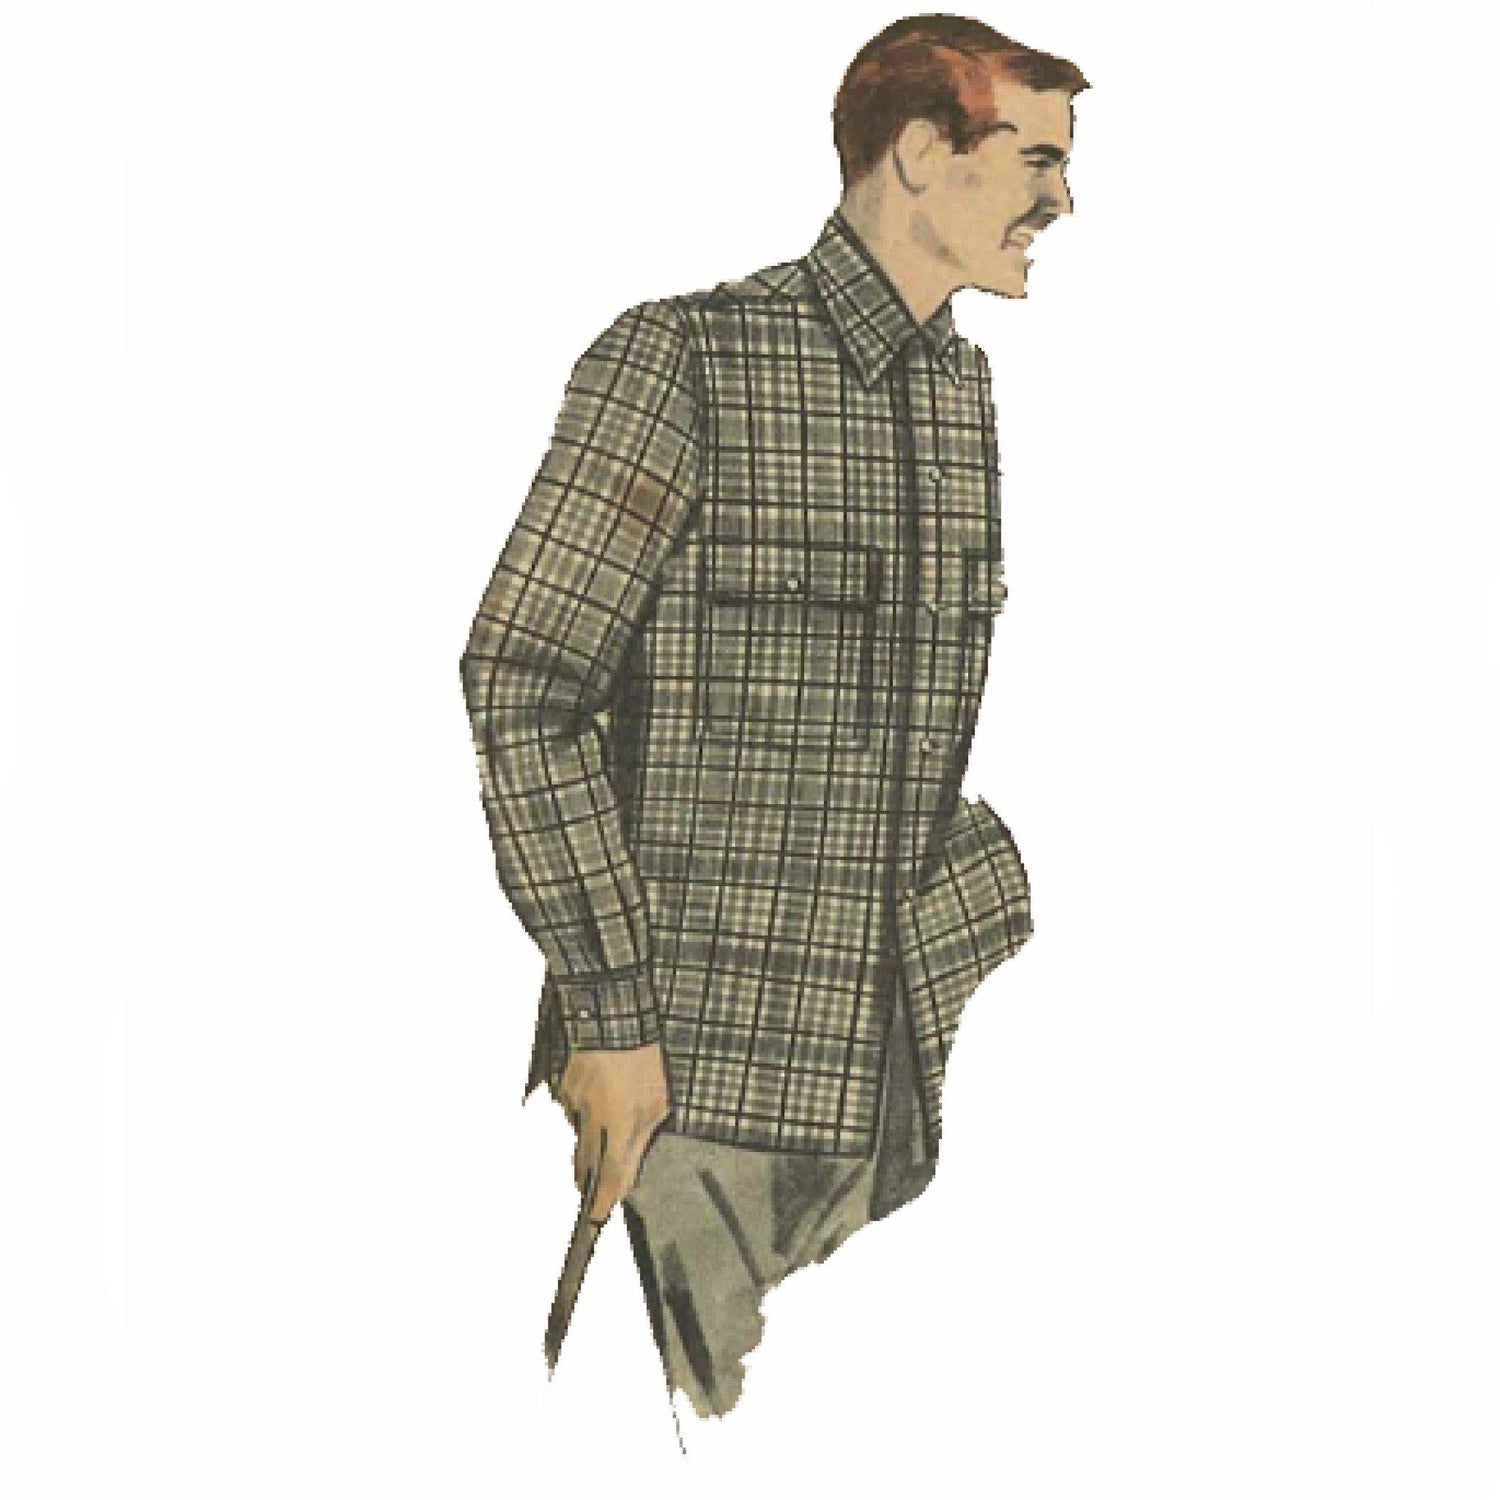 Line drawing of all pattern pieces included in "1950s Pattern, Men's Casual Sports Shirt"